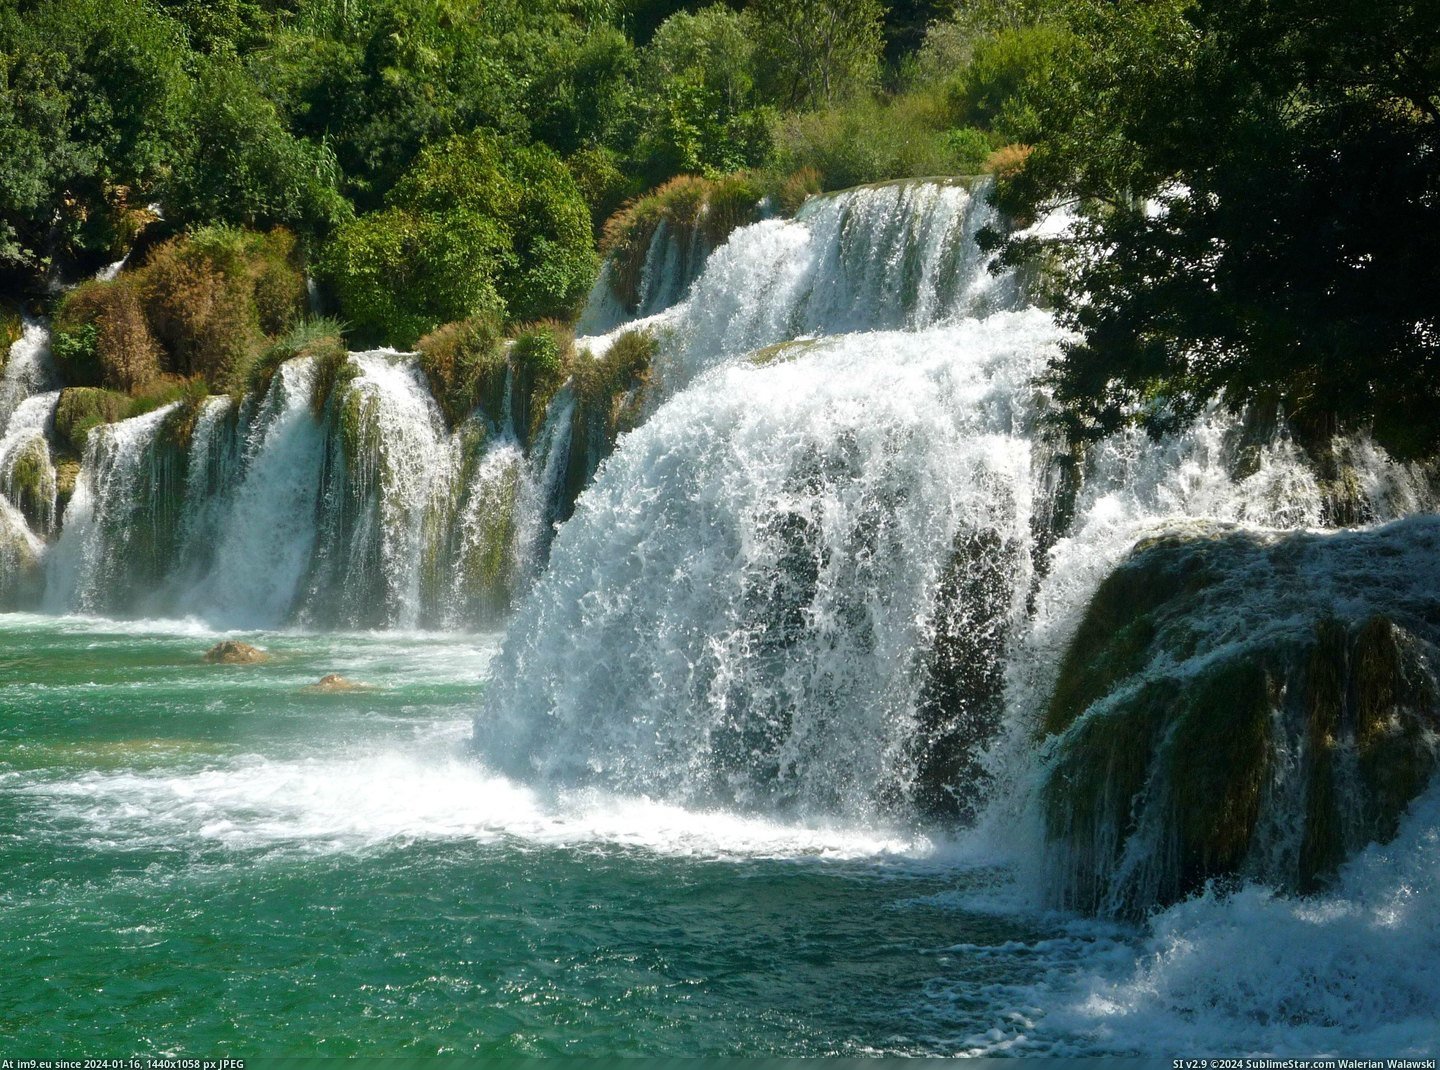 #Park #Beautiful #Croatia #Waterfalls #World #National [Earthporn] Croatia has some of the most beautiful waterfalls in the world (Krka National Park) [OC] [2736 x 2022] Pic. (Obraz z album My r/EARTHPORN favs))